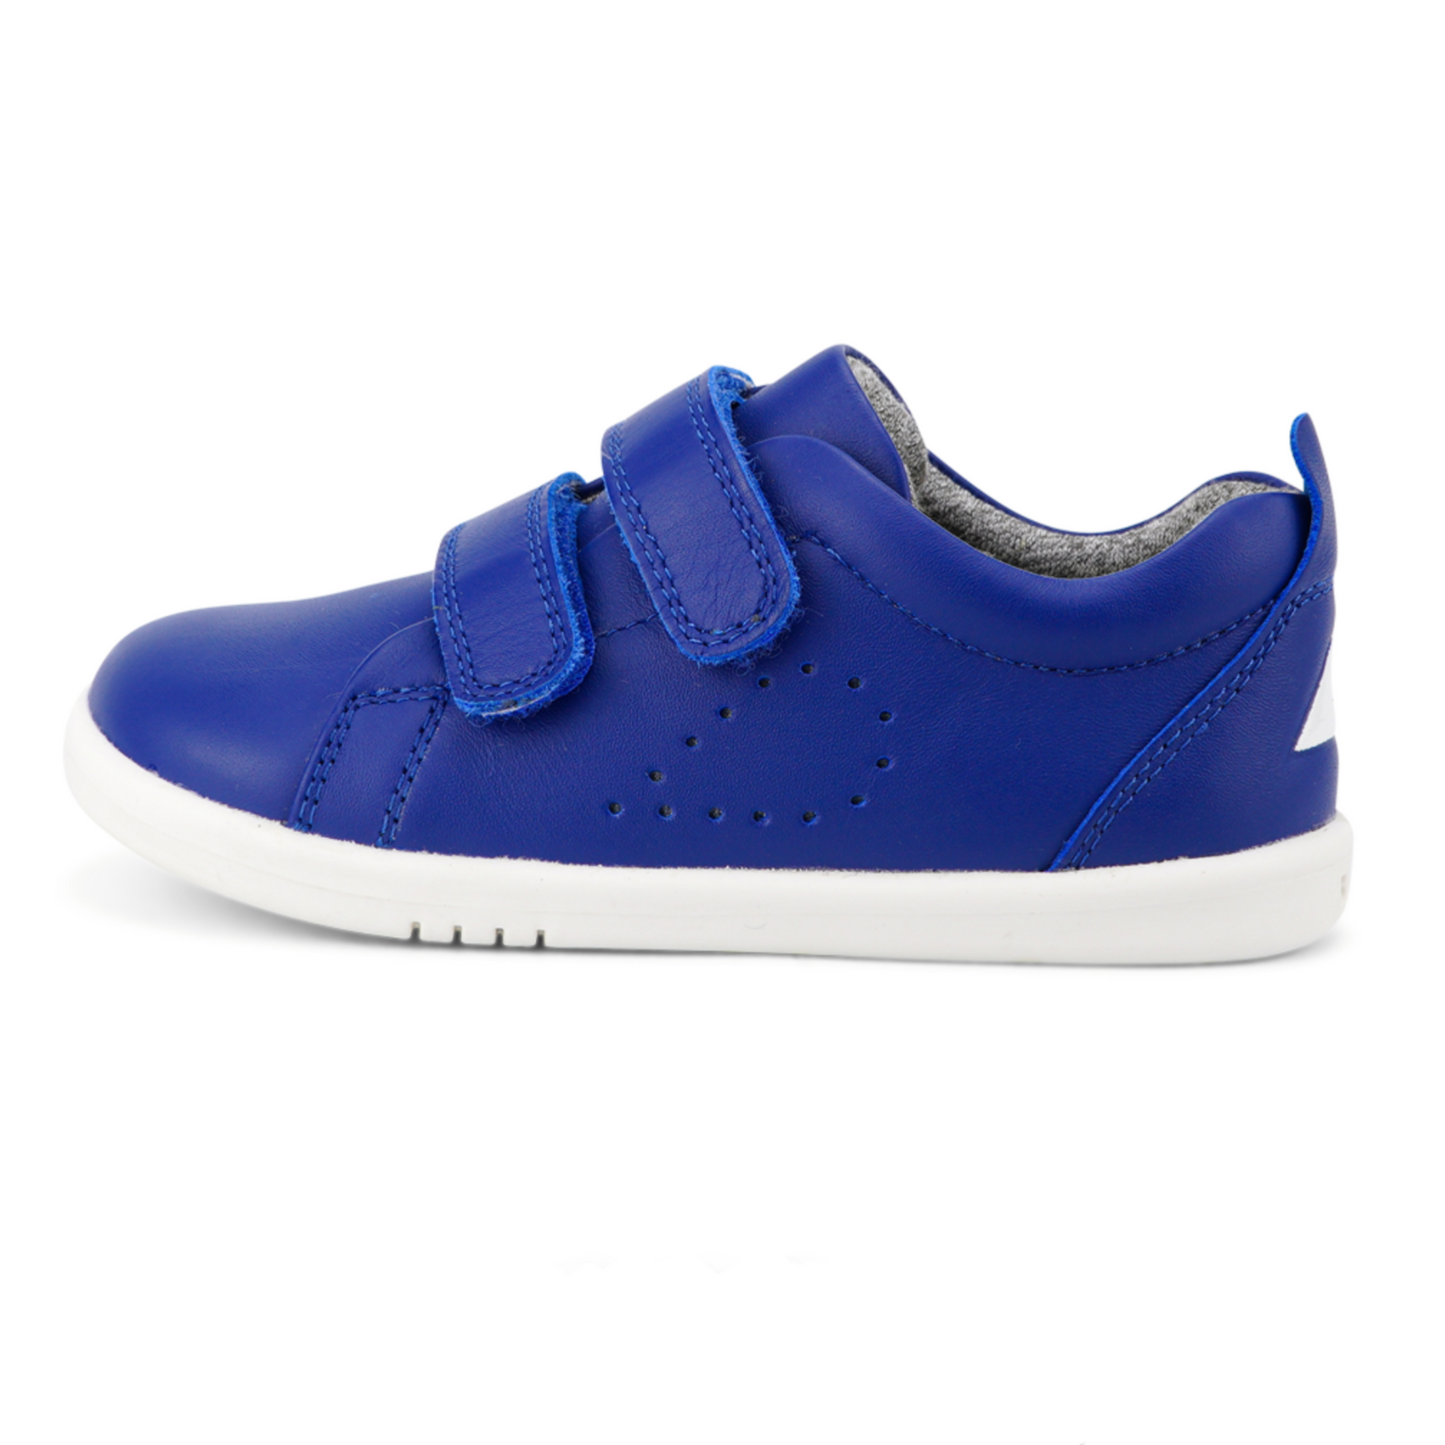 Bobux Grass Court Blueberry Leather Trainers